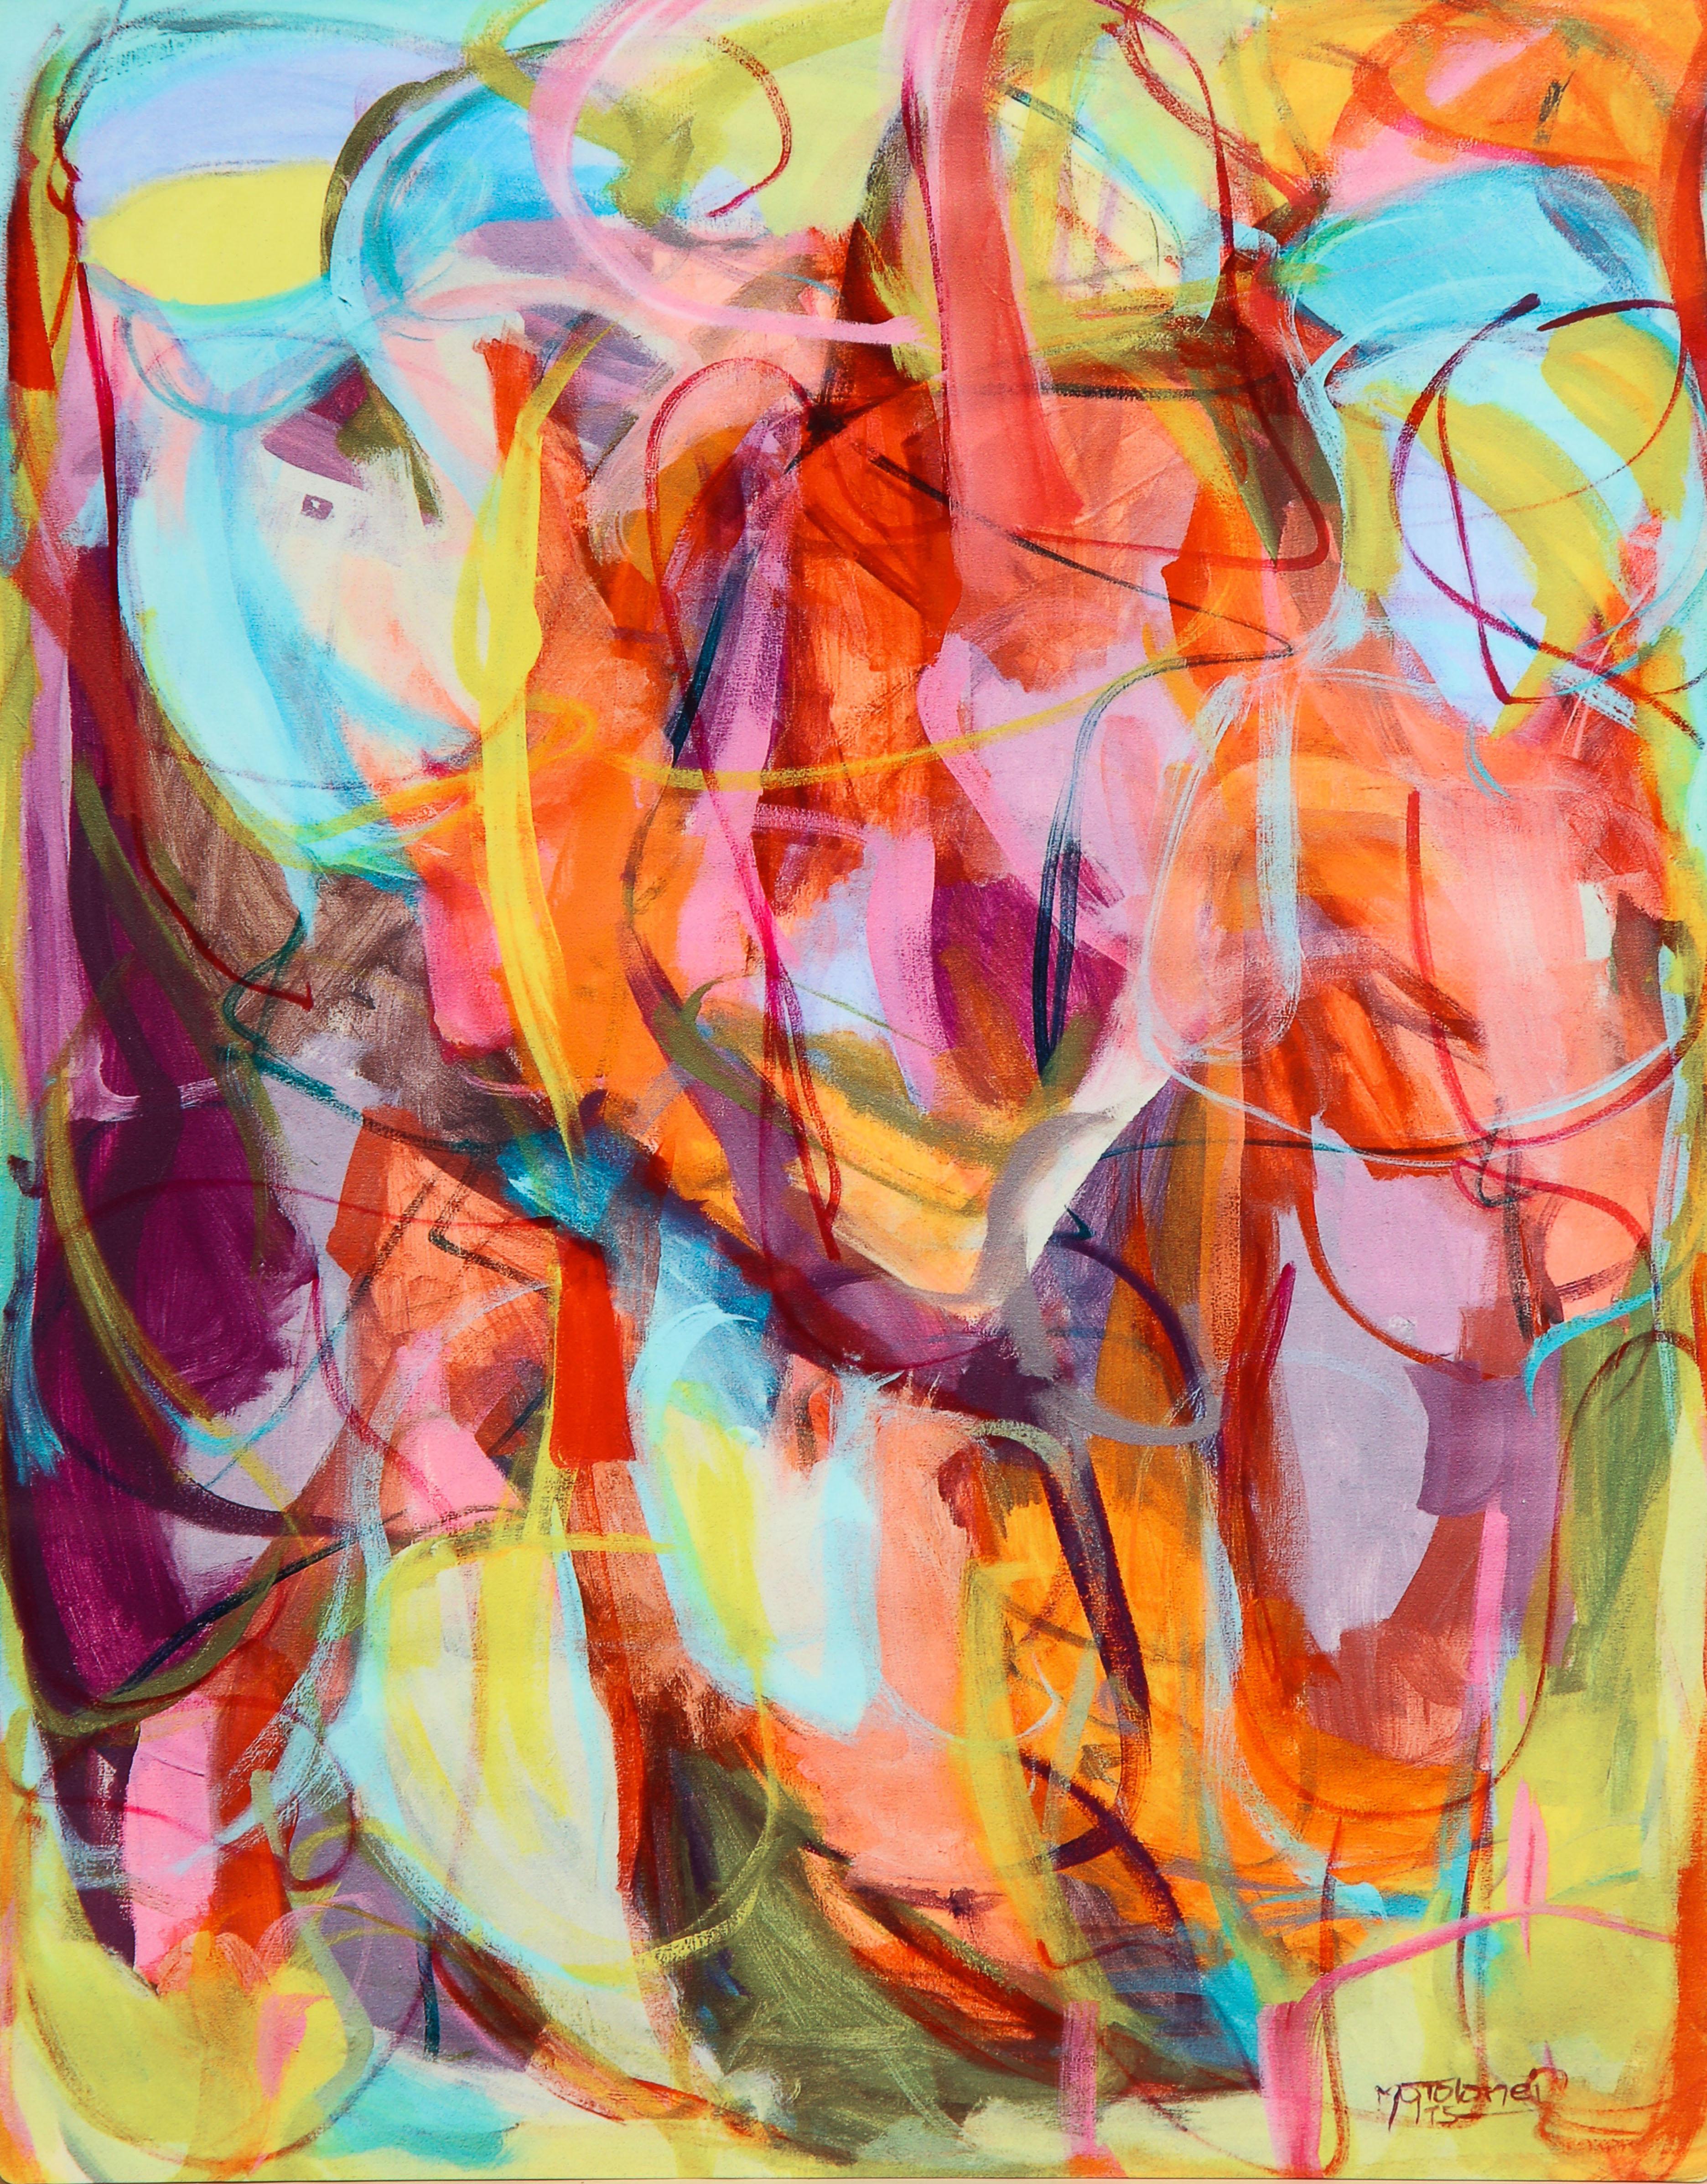 This is a photographic print on metal of her painting.

Tolomei uses her mastery of colors to create powerful abstract compositions.  Her bold expressive brush strokes and fields of colors fills the canvas while the vibrant color combinations give